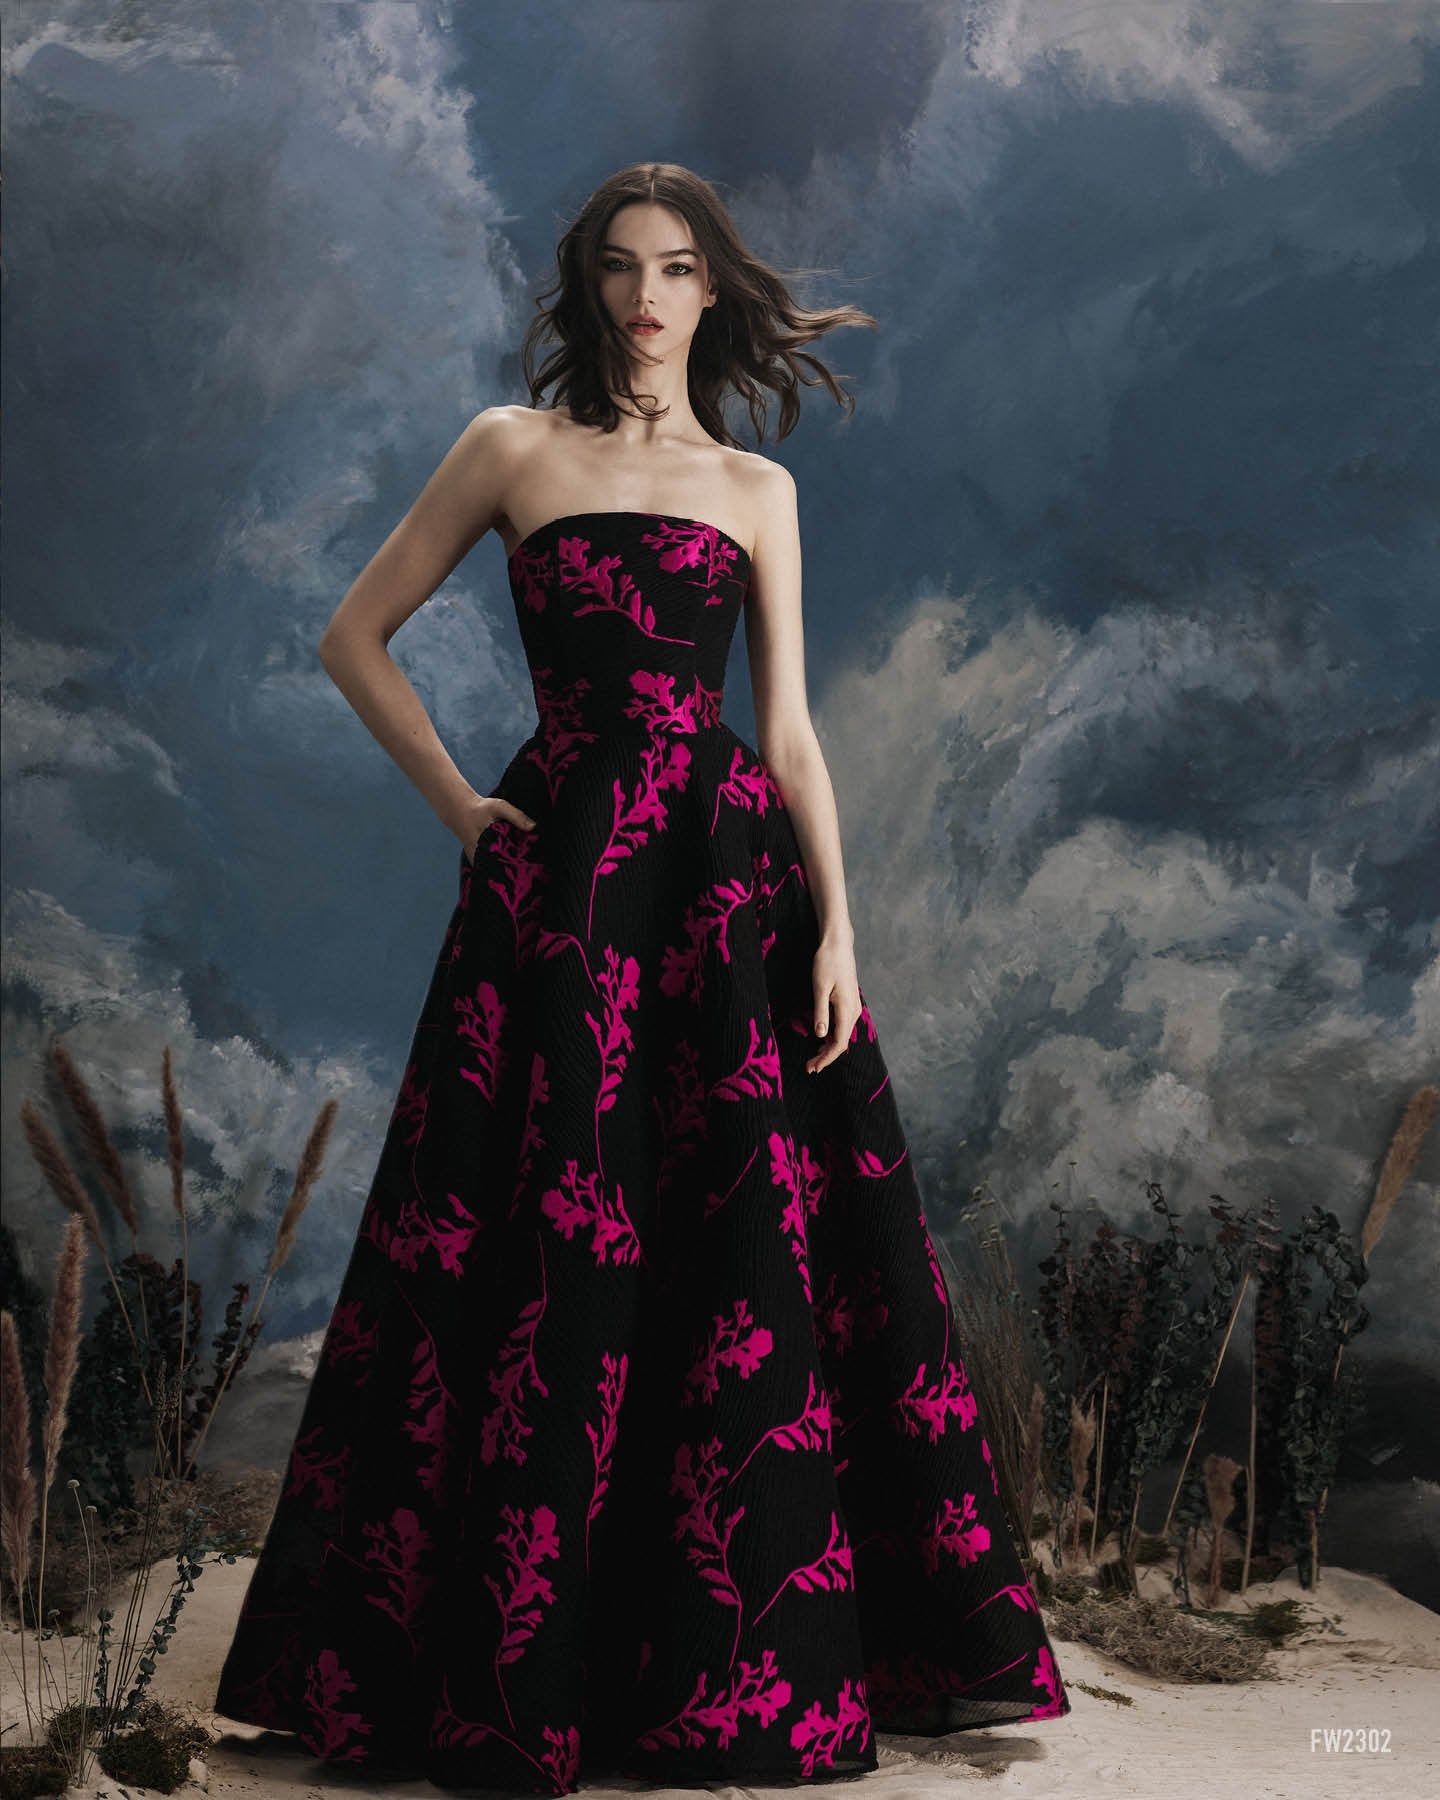 Enchanting Lucian Matis Strapless Floral Evening Gown EVENING DRESSES, LONG DRESS, MOTHER OF THE BRIDE DRESS, MOTHER OF THE GROOM DRESS, WEDDING GUEST DRESSES, Long Island, New York, Mother of the Bride gowns near me, Woodbury Greenvale Mother of the Bride dresses Bat Mitzvah Bar Mitzvah, Evening Wear, Wedding Wear.